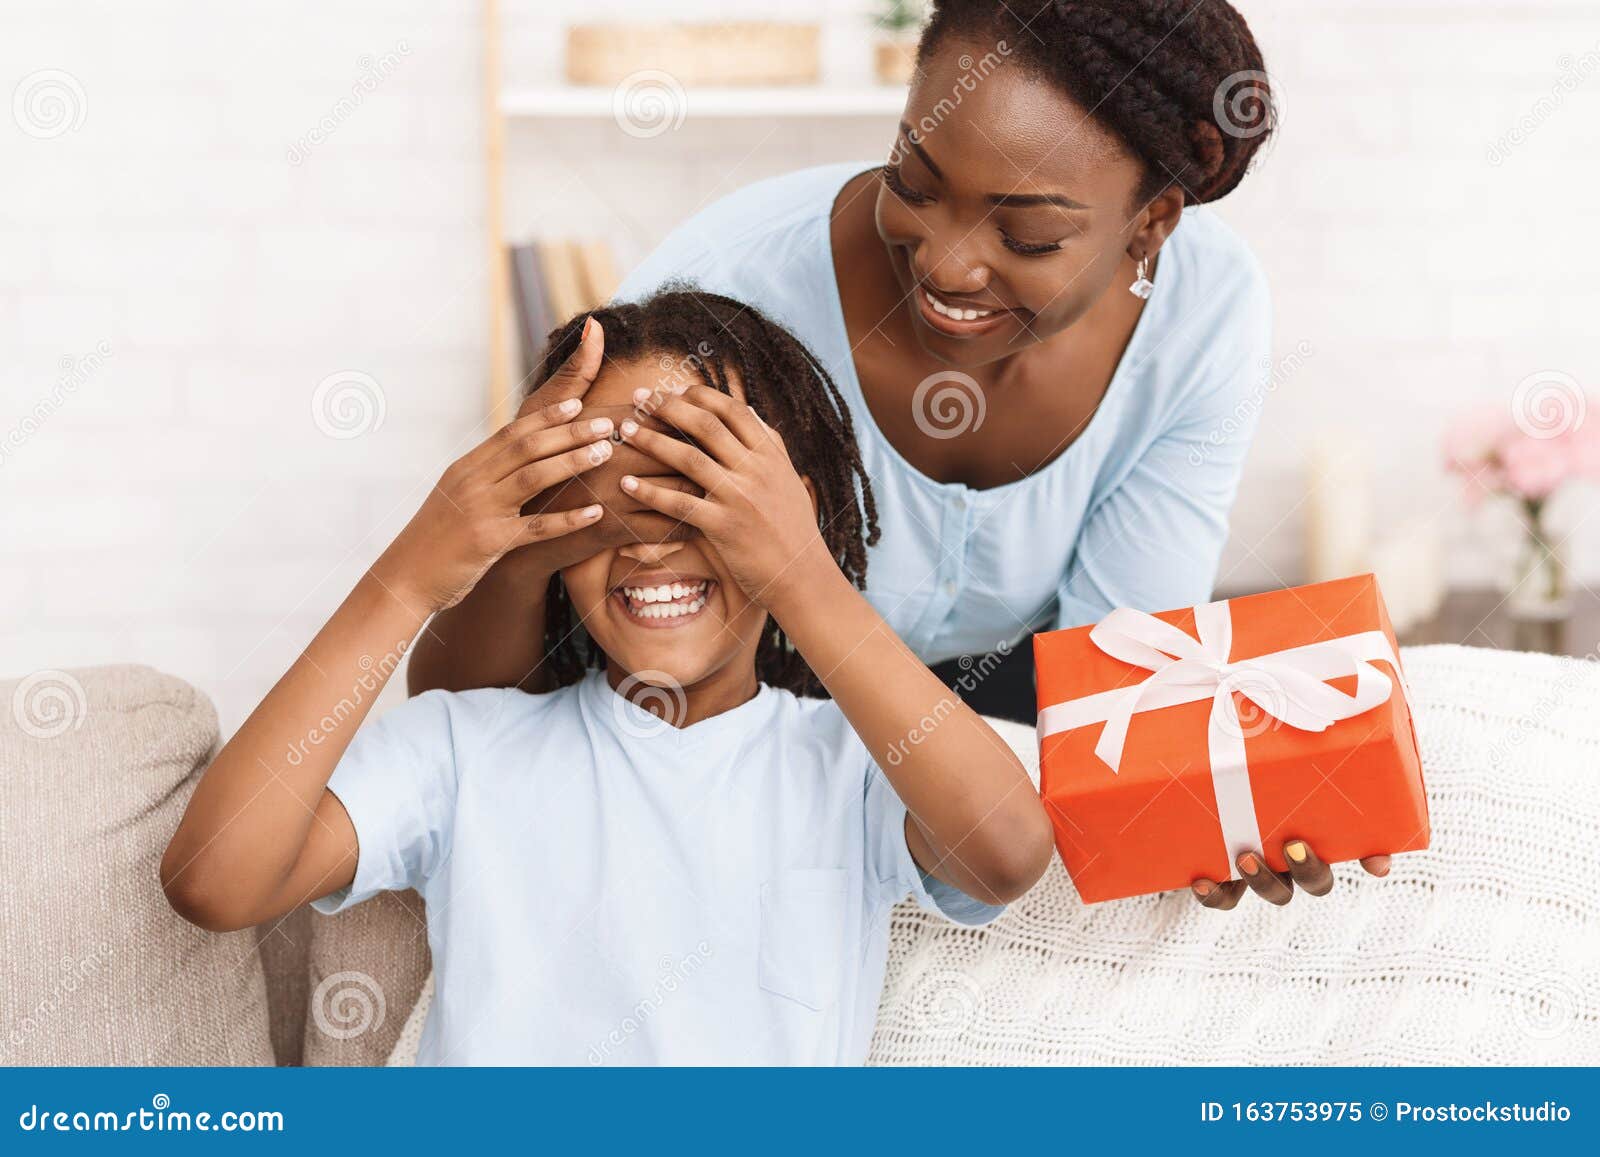 Daughter Gives Her Mother Flowers Gifts She Makes Her Surprise Stock Photo  by ©vadimphoto1@gmail.com 177813608